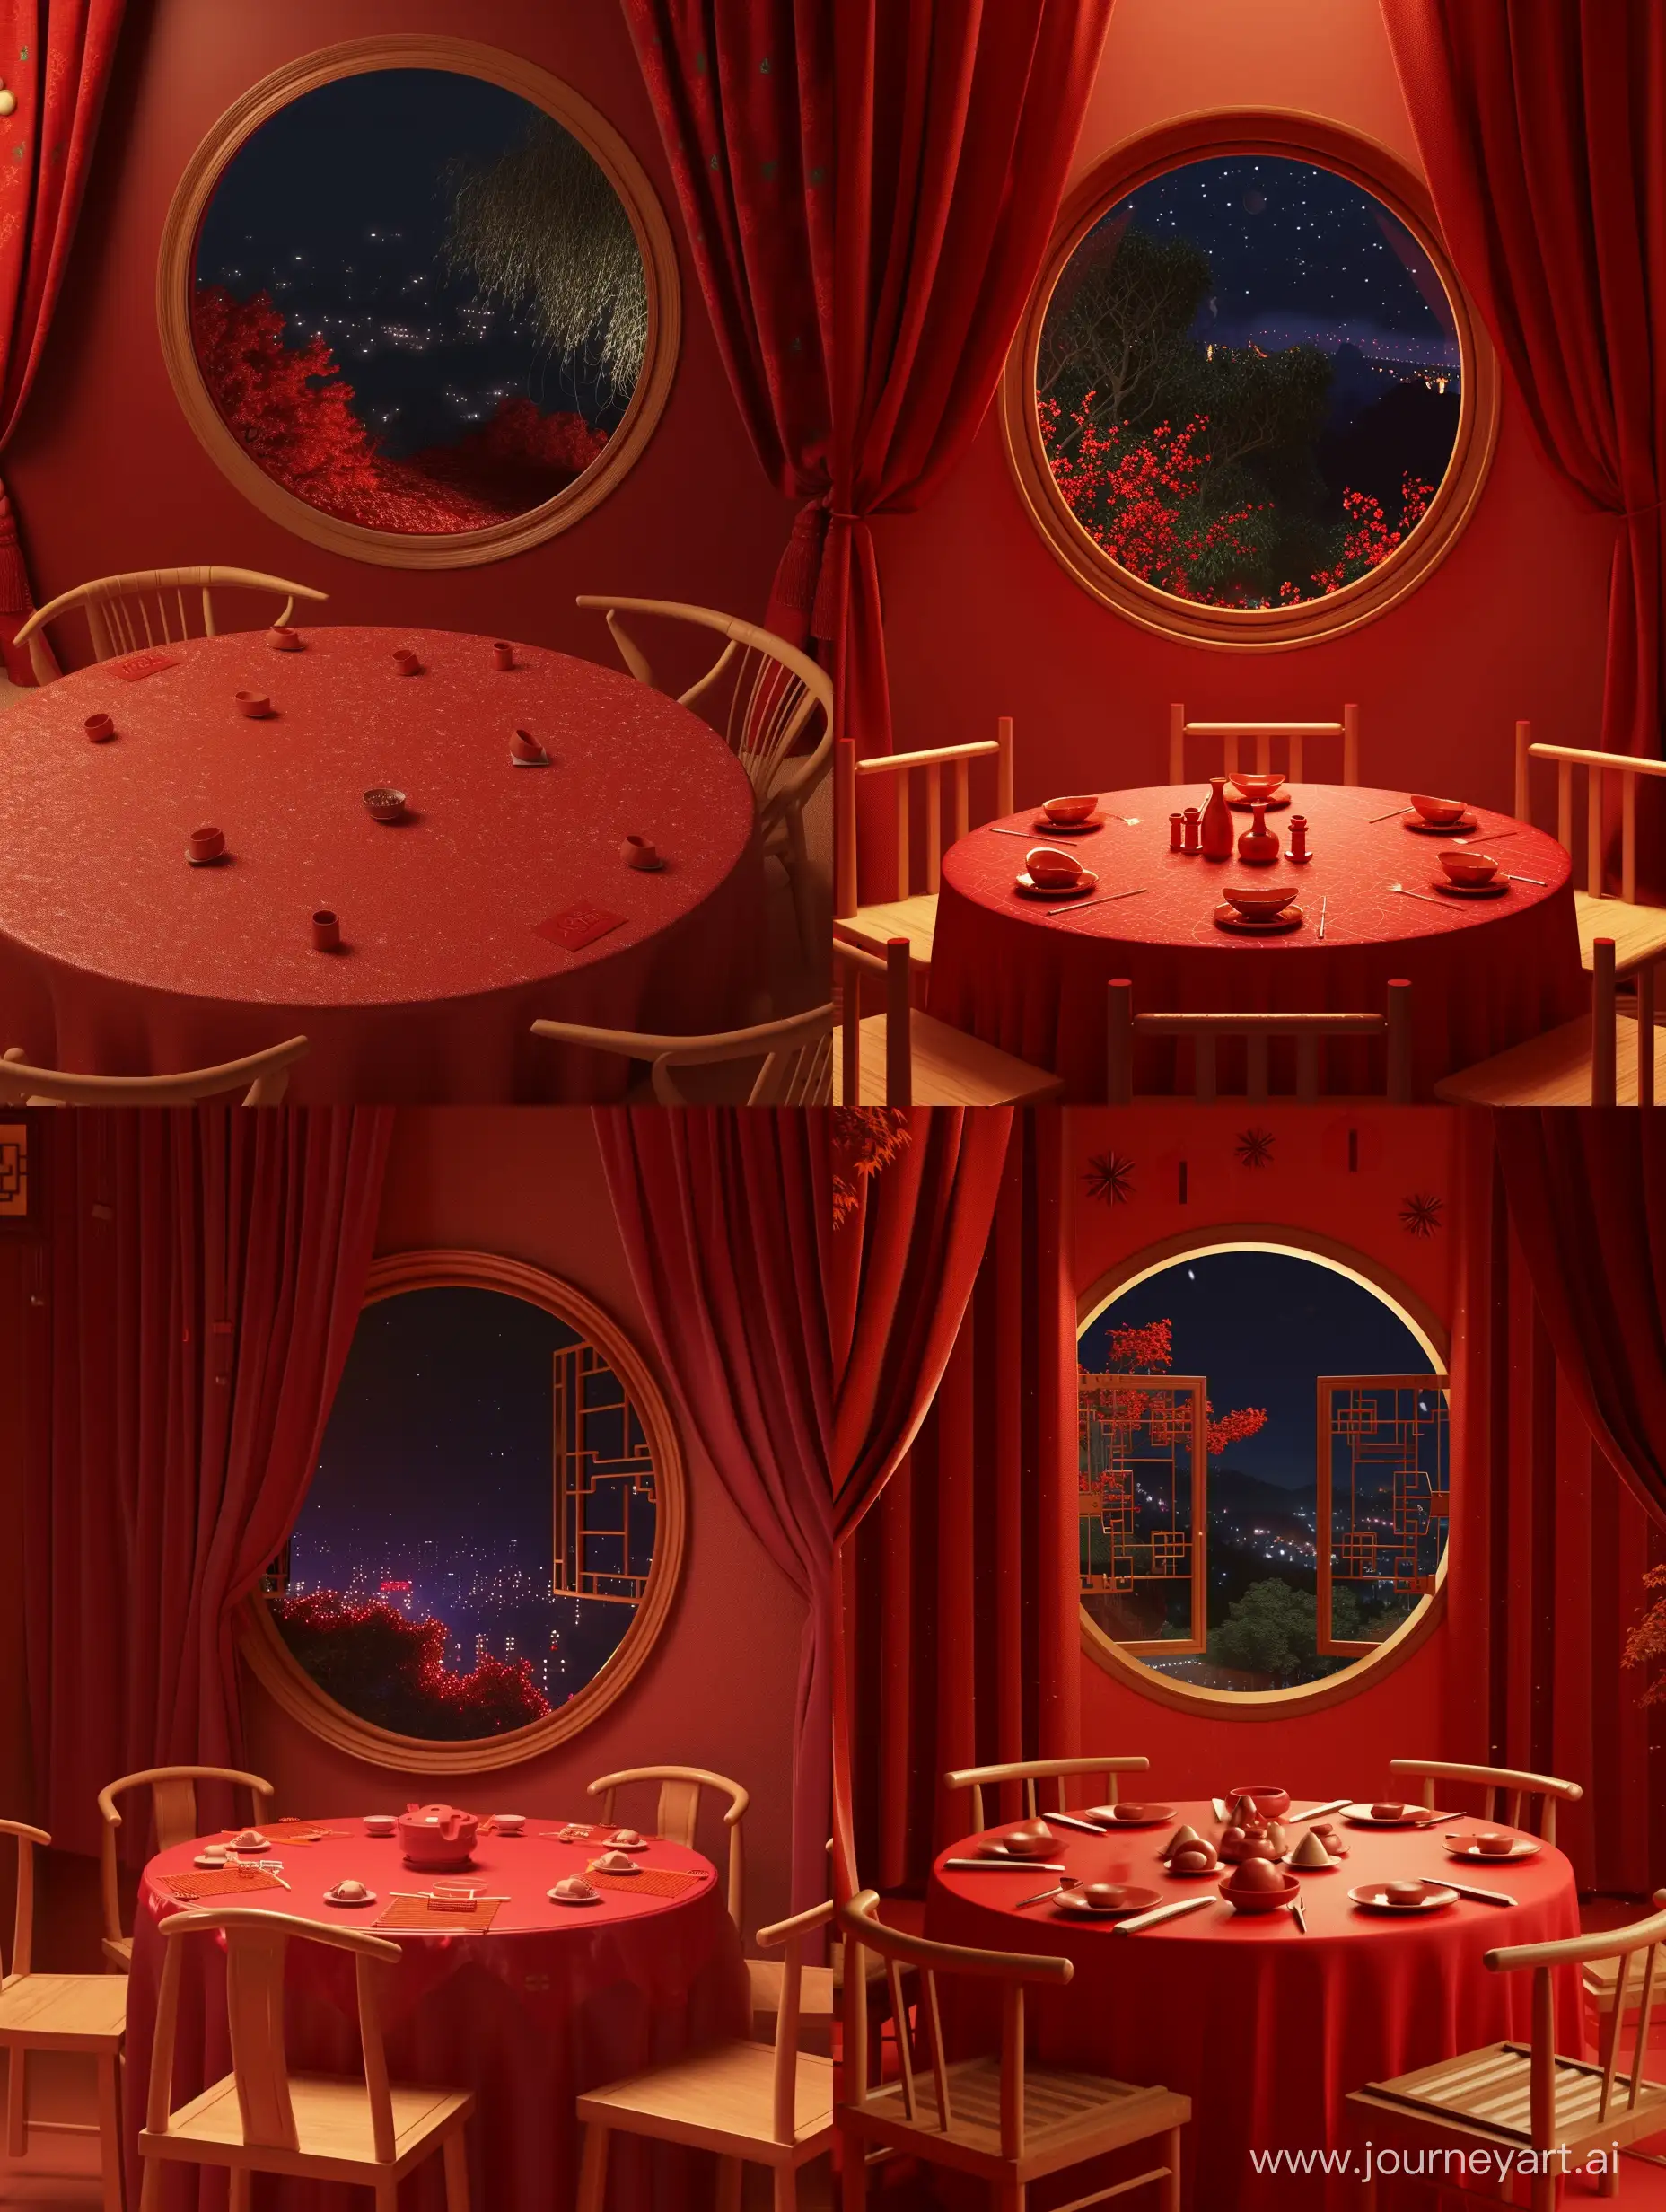 ip design style, Bubble Mart blind box style, Spring Festival Eve dinner scene,red round table and red tablecloth, some wooden chairs around the round table, a small round Chinese-style window, outside the window is the night view, red wall and red curtains, octane rendering, from behance, Blender, clay texture, isometric view, close-up